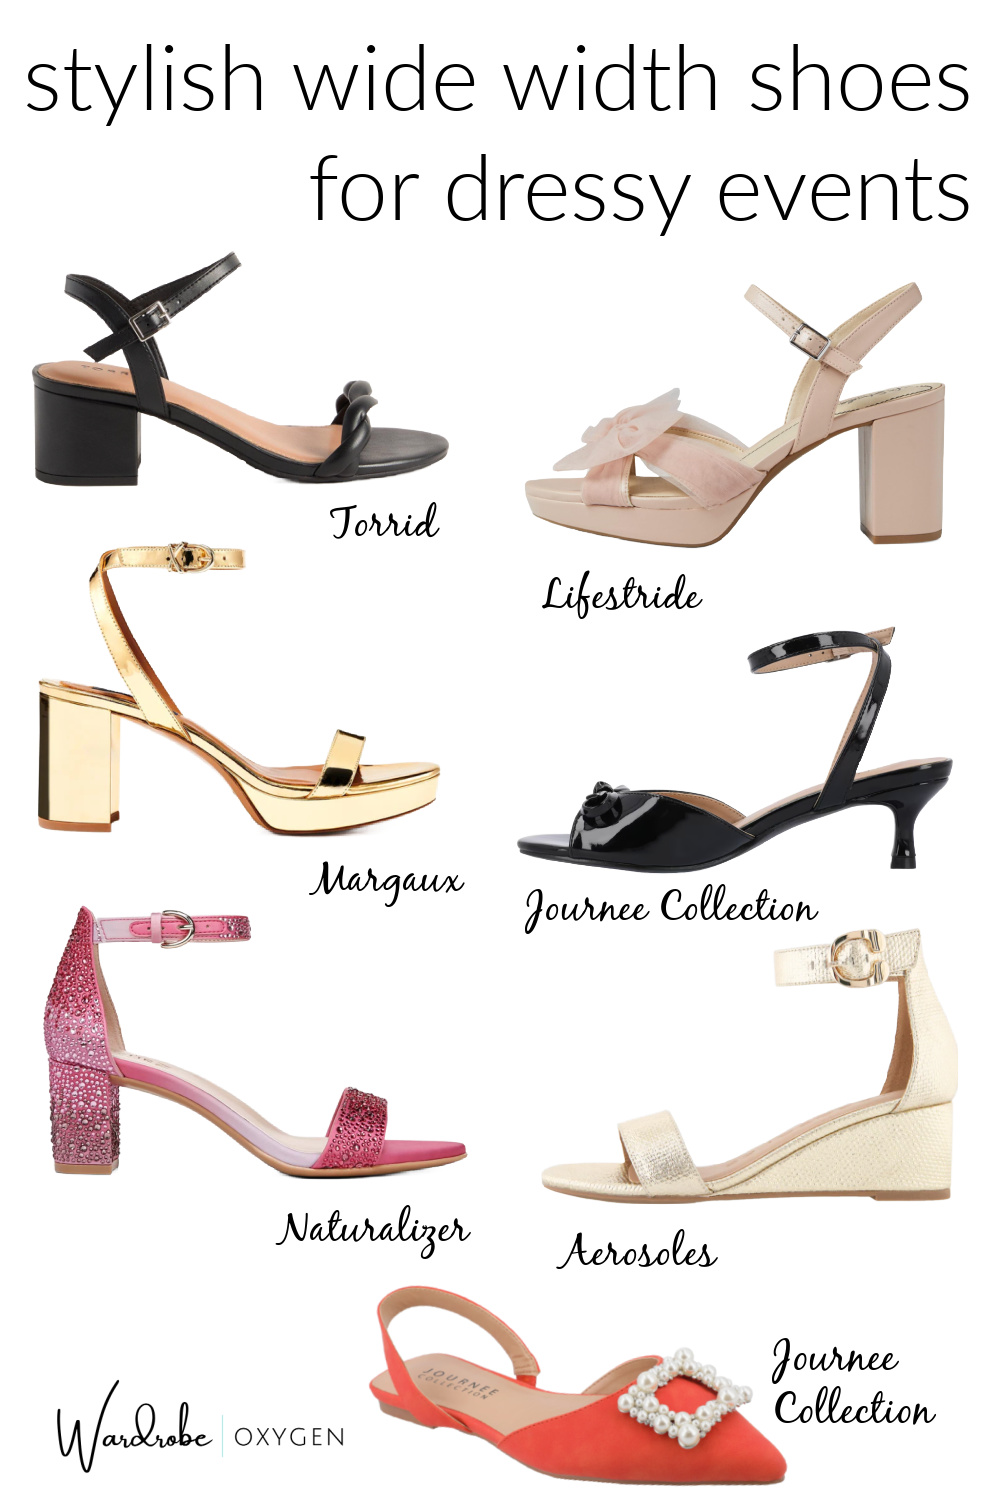 Where to Shop for Truly Stylish Wide Width Shoes | Wardrobe Oxygen